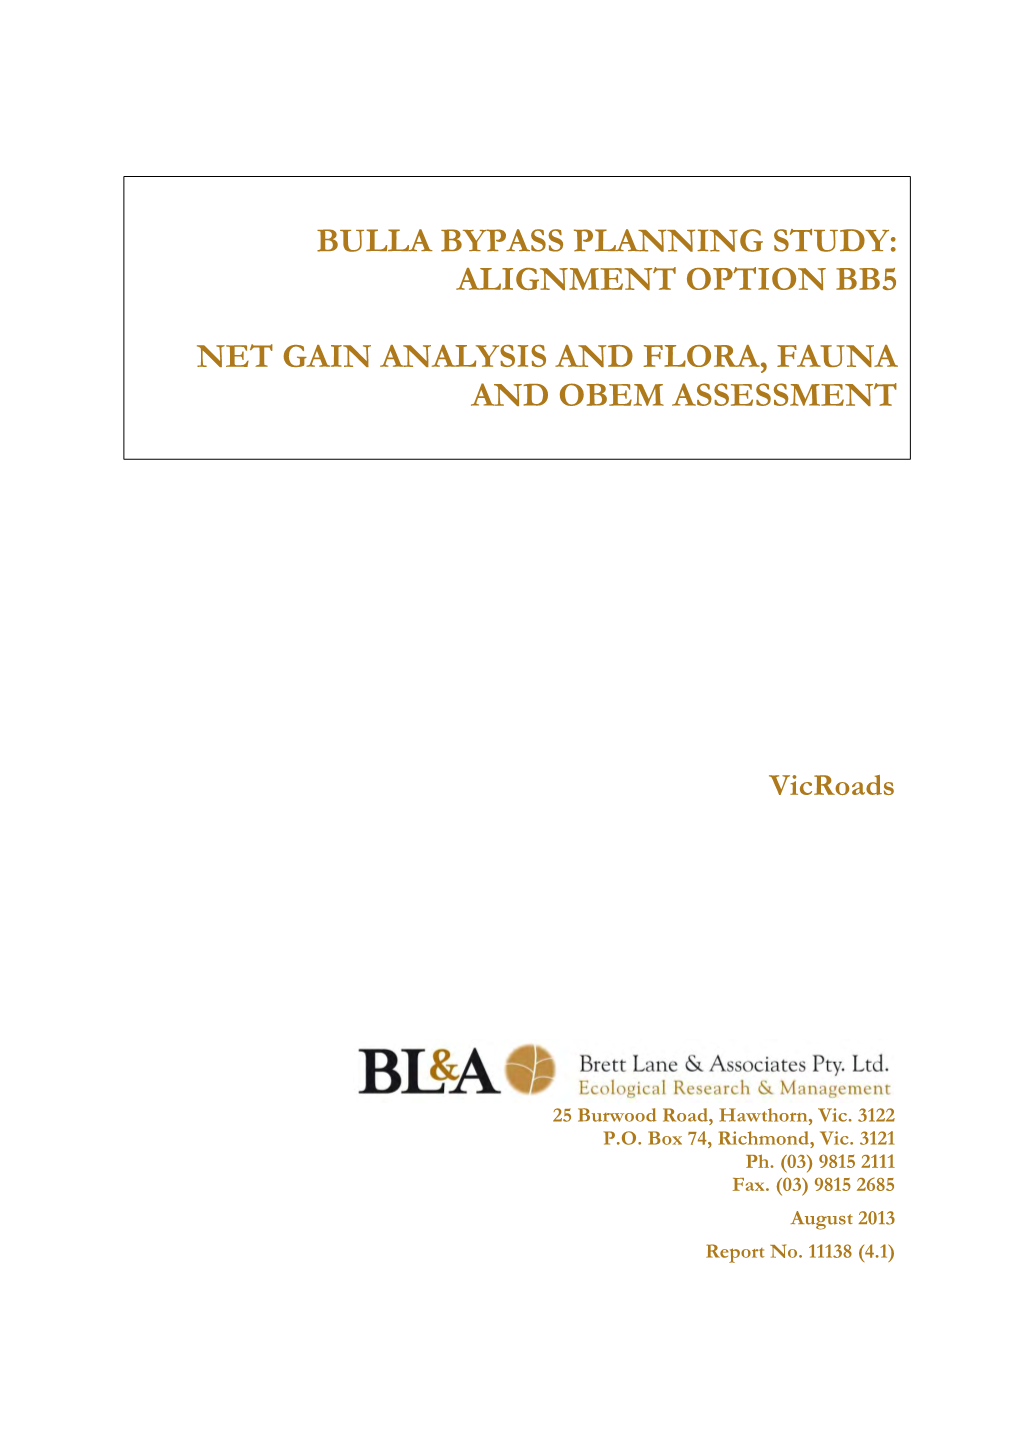 Bulla Bypass Planning Study: Alignment Option Bb5 Net Gain Analysis and Flora, Fauna and Obem Assessment